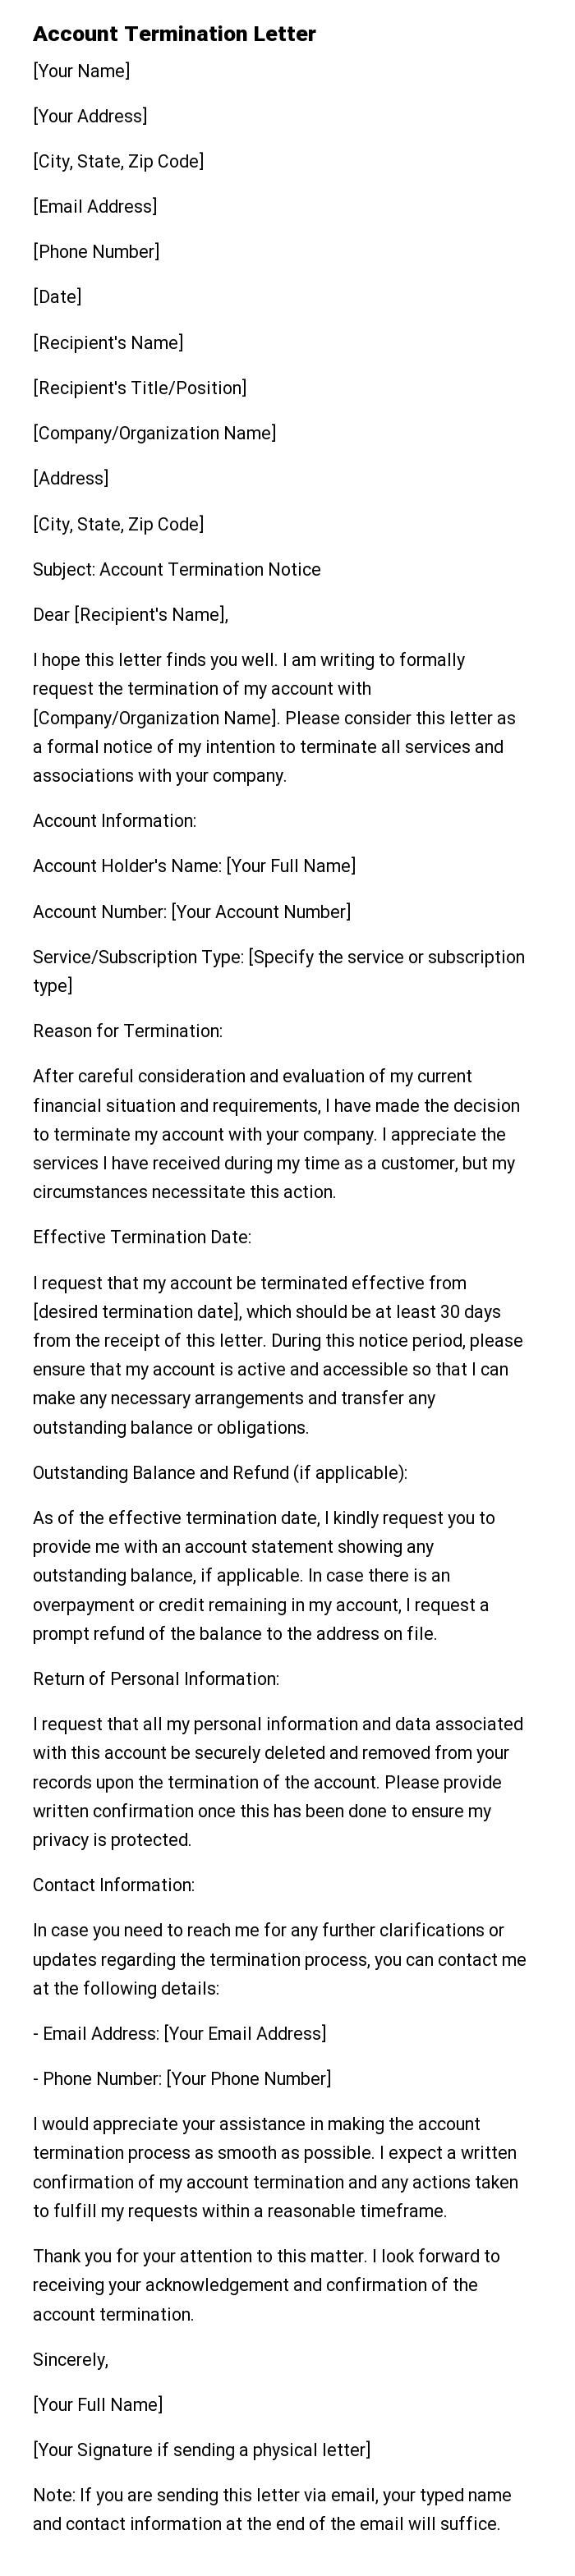 Account Termination Letter